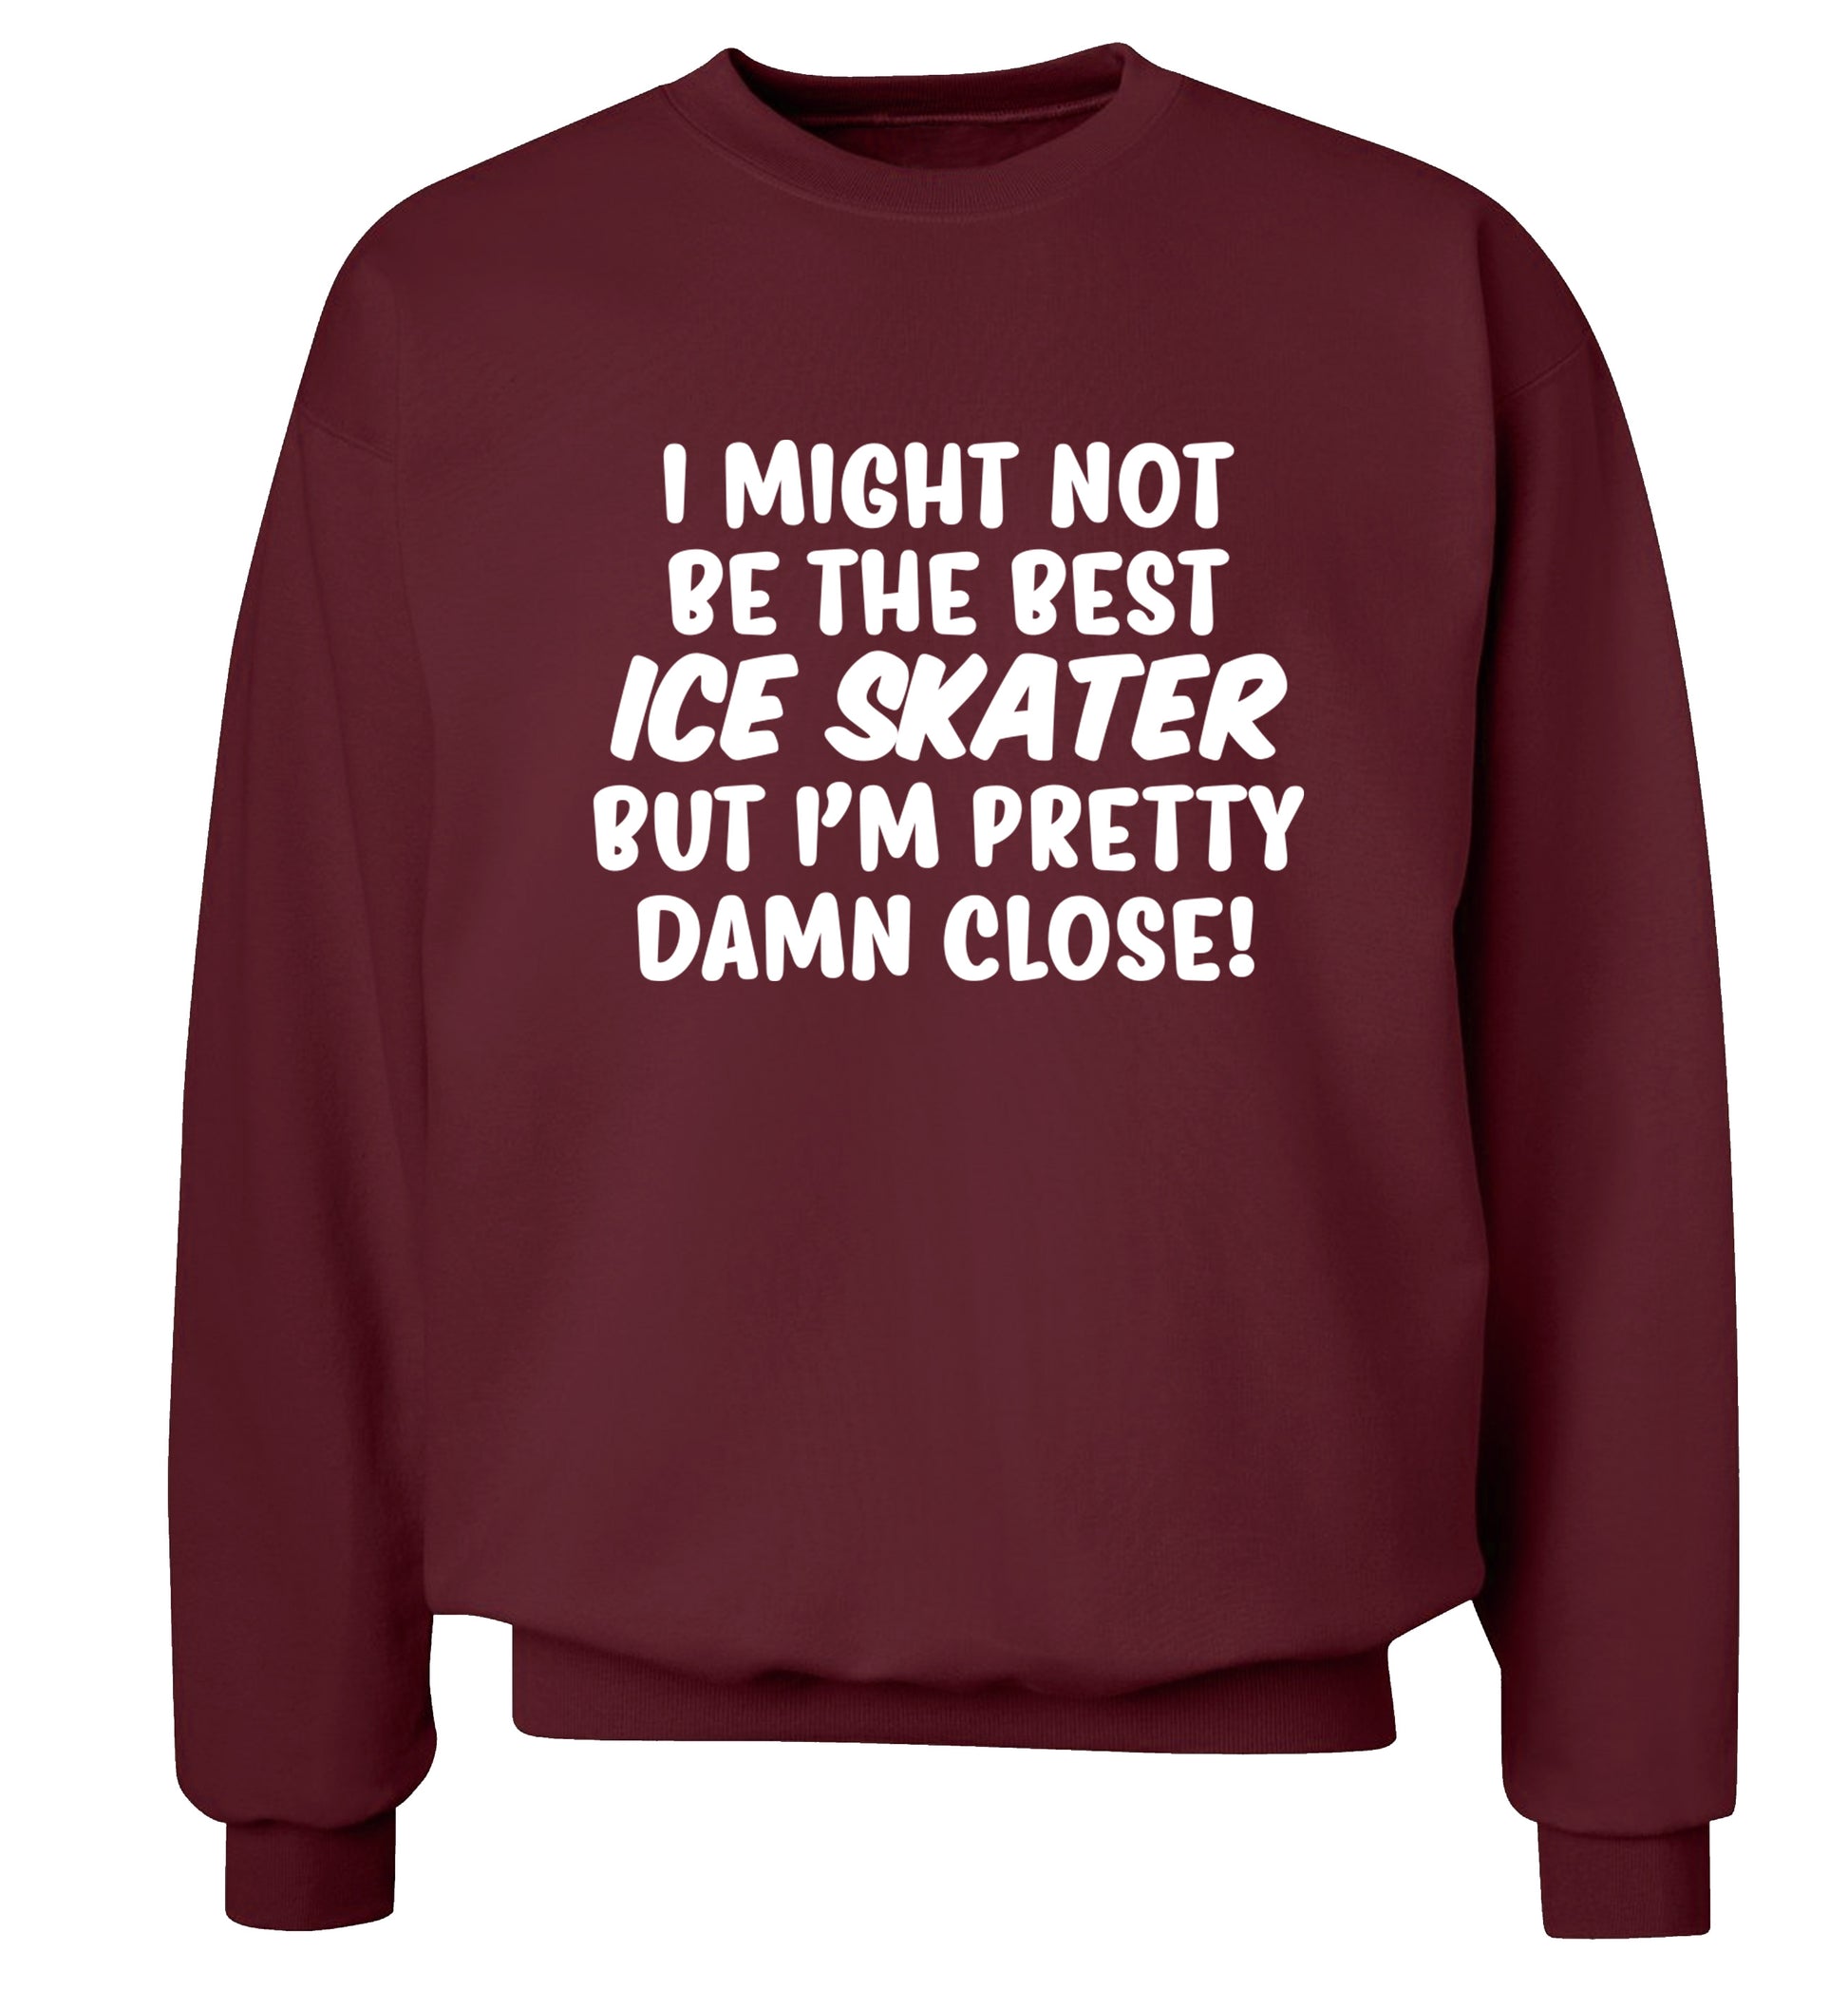 I might not be the best ice skater but I'm pretty damn close! Adult's unisexmaroon Sweater 2XL